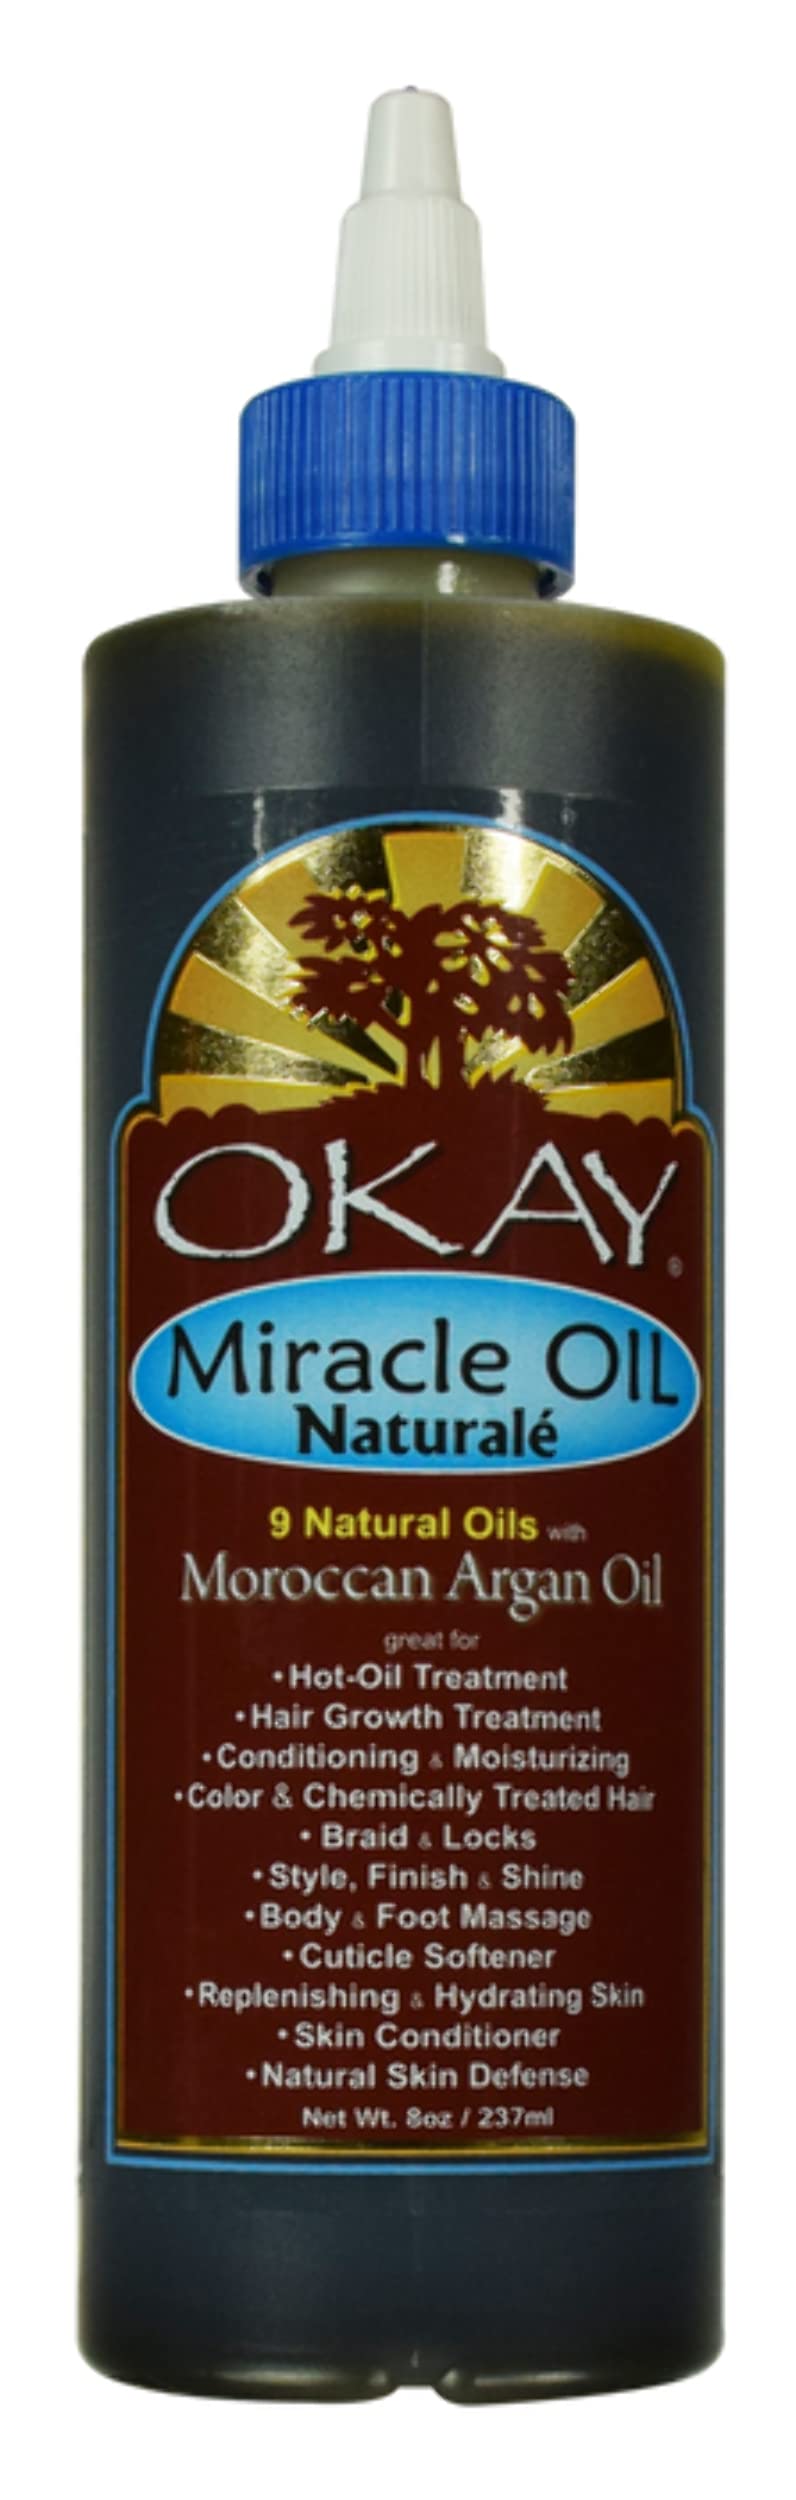 Okay Oil All Natural for Hair & Skin, Miracle, 8 Ounce